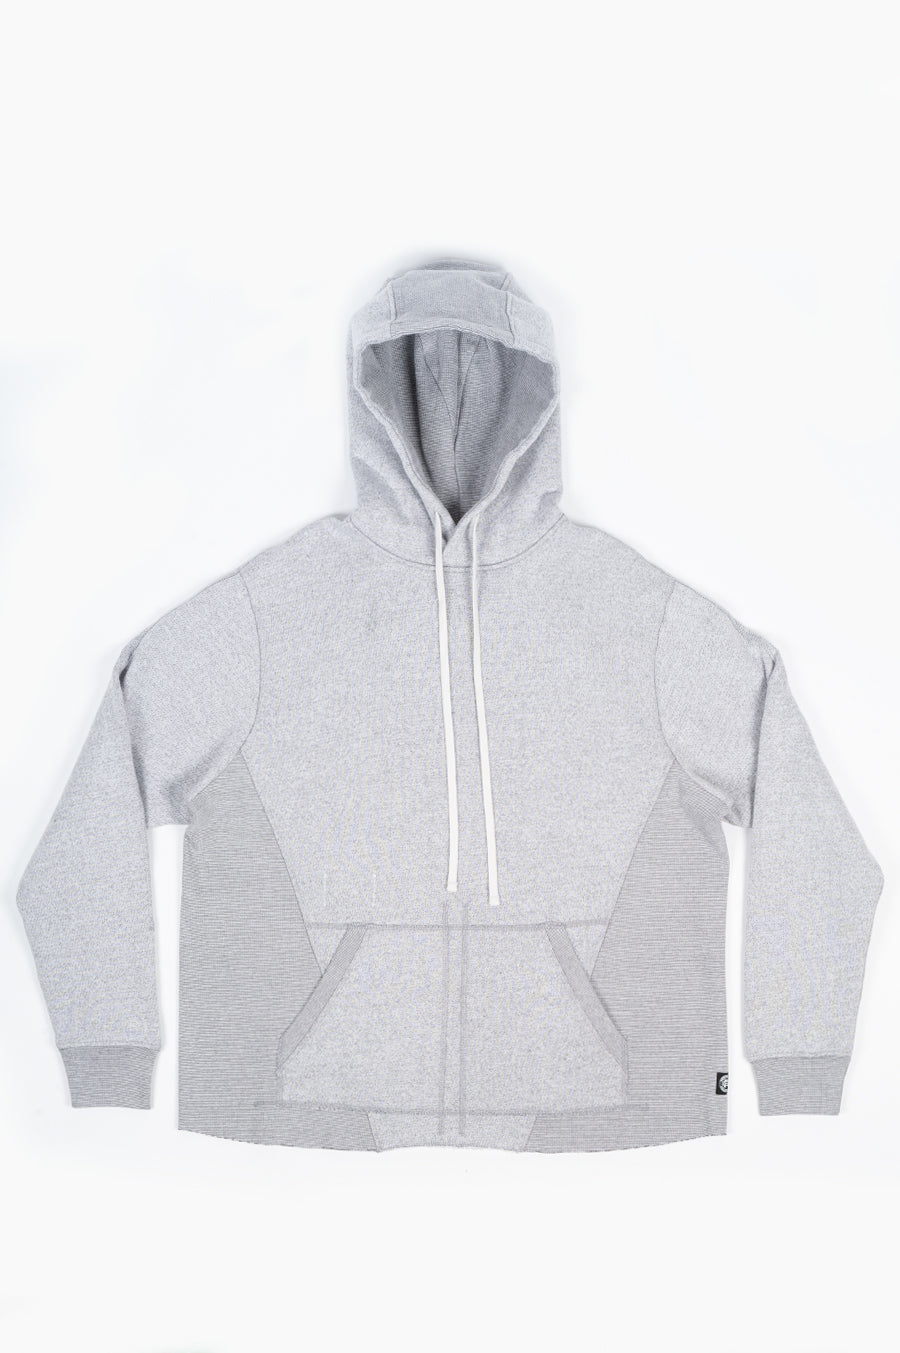 REIGNING CHAMP X JIDE OSIFESO KNIT TIGER FLEECE PULLOVER HOODIE GREY